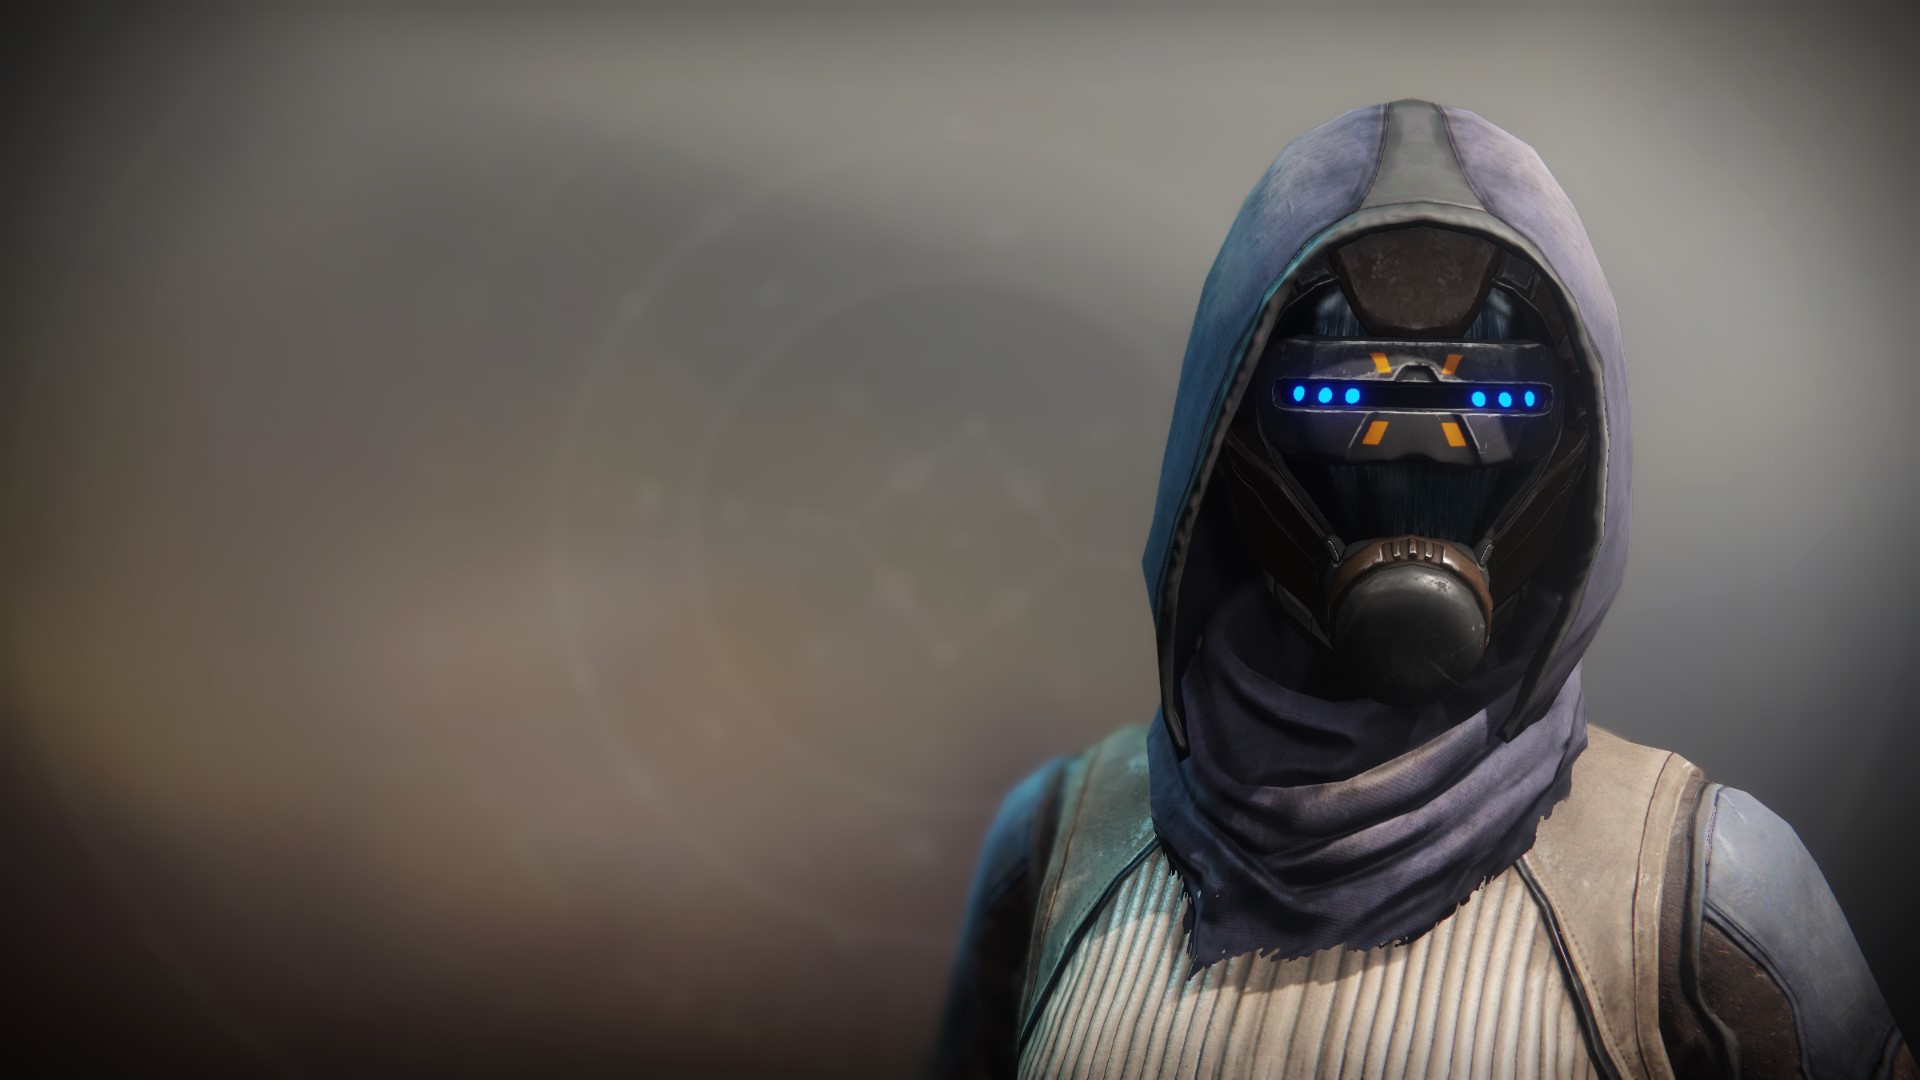 An in-game render of the Seventh Seraph Cowl.